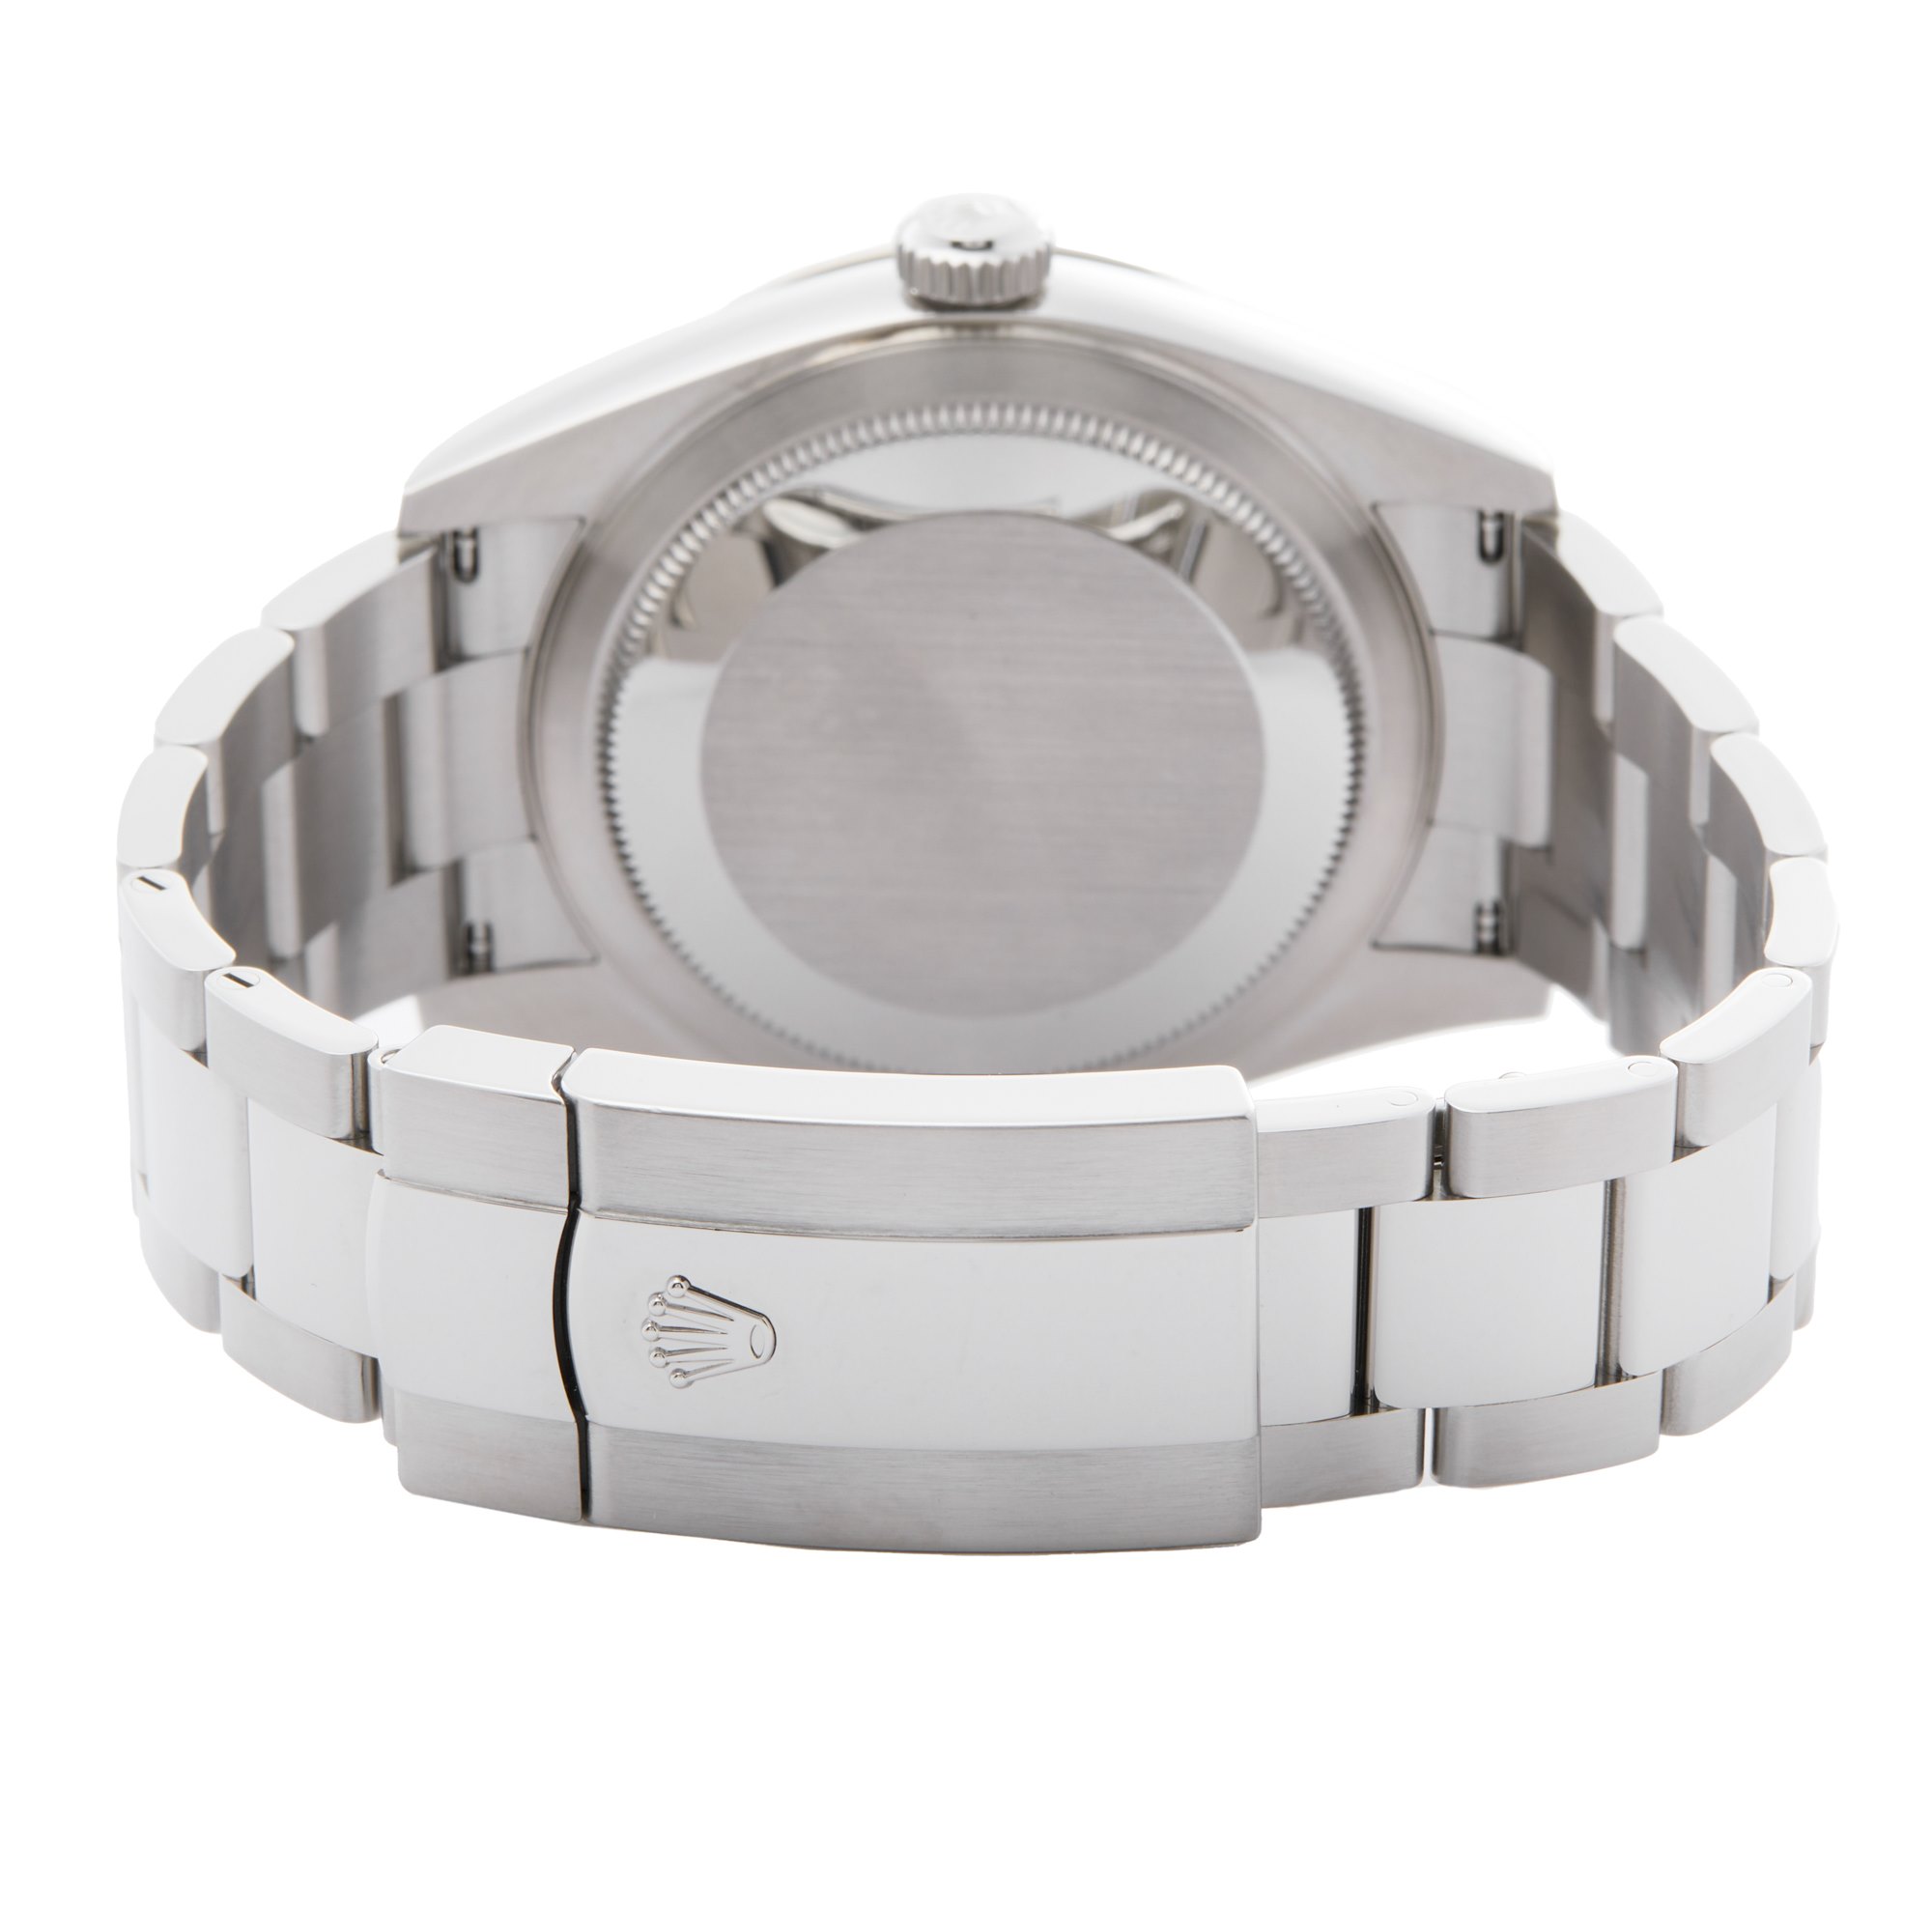 Rolex Sky-Dweller White Gold & Stainless Steel 326934